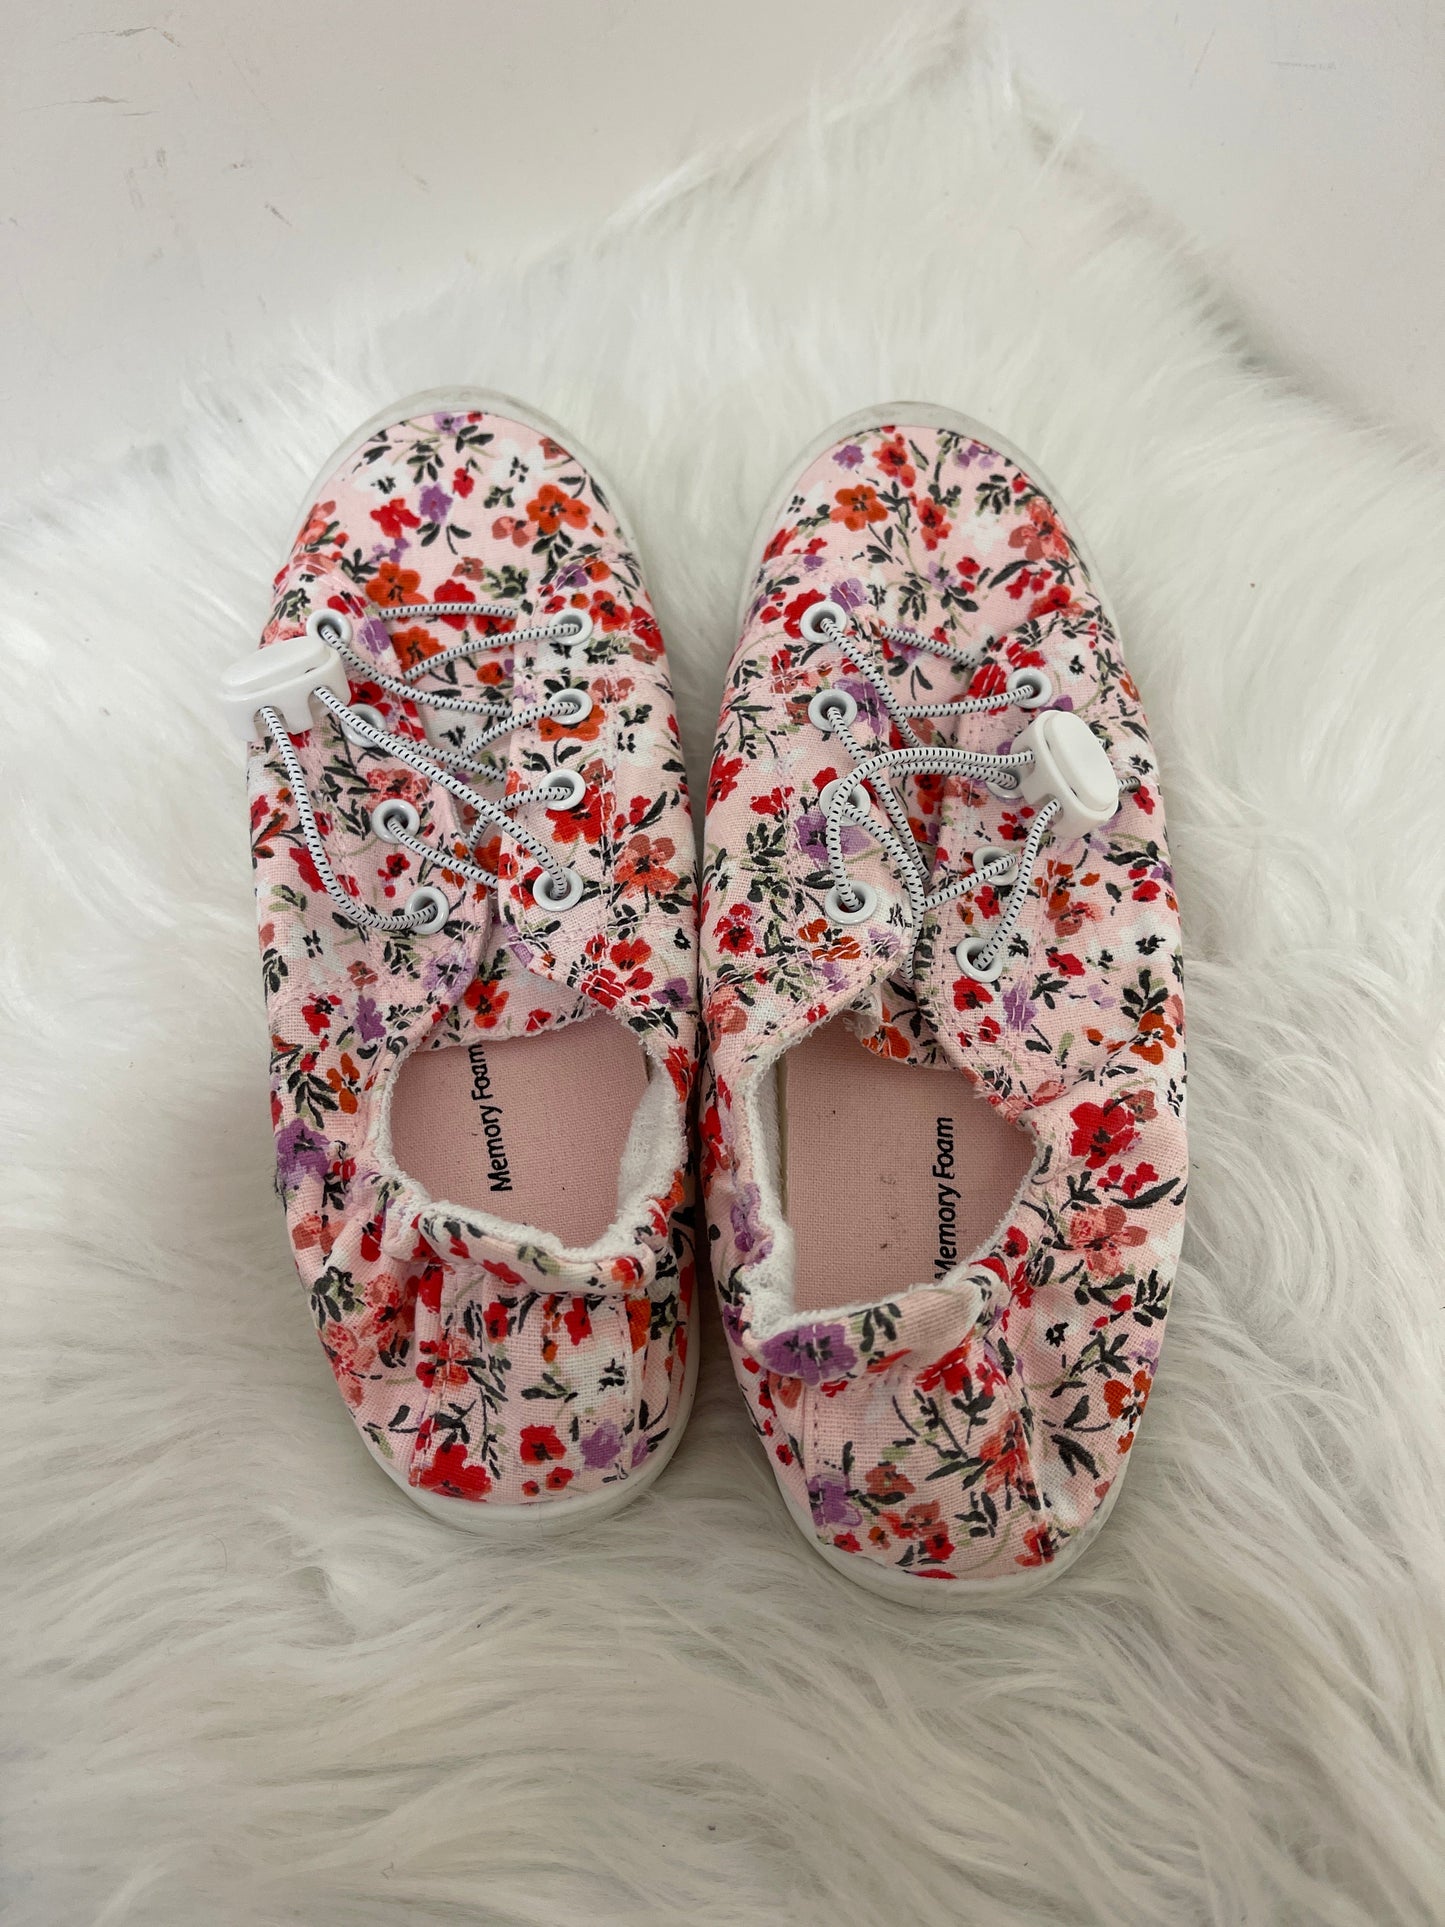 Floral Print Shoes Flats Time And Tru, Size 8